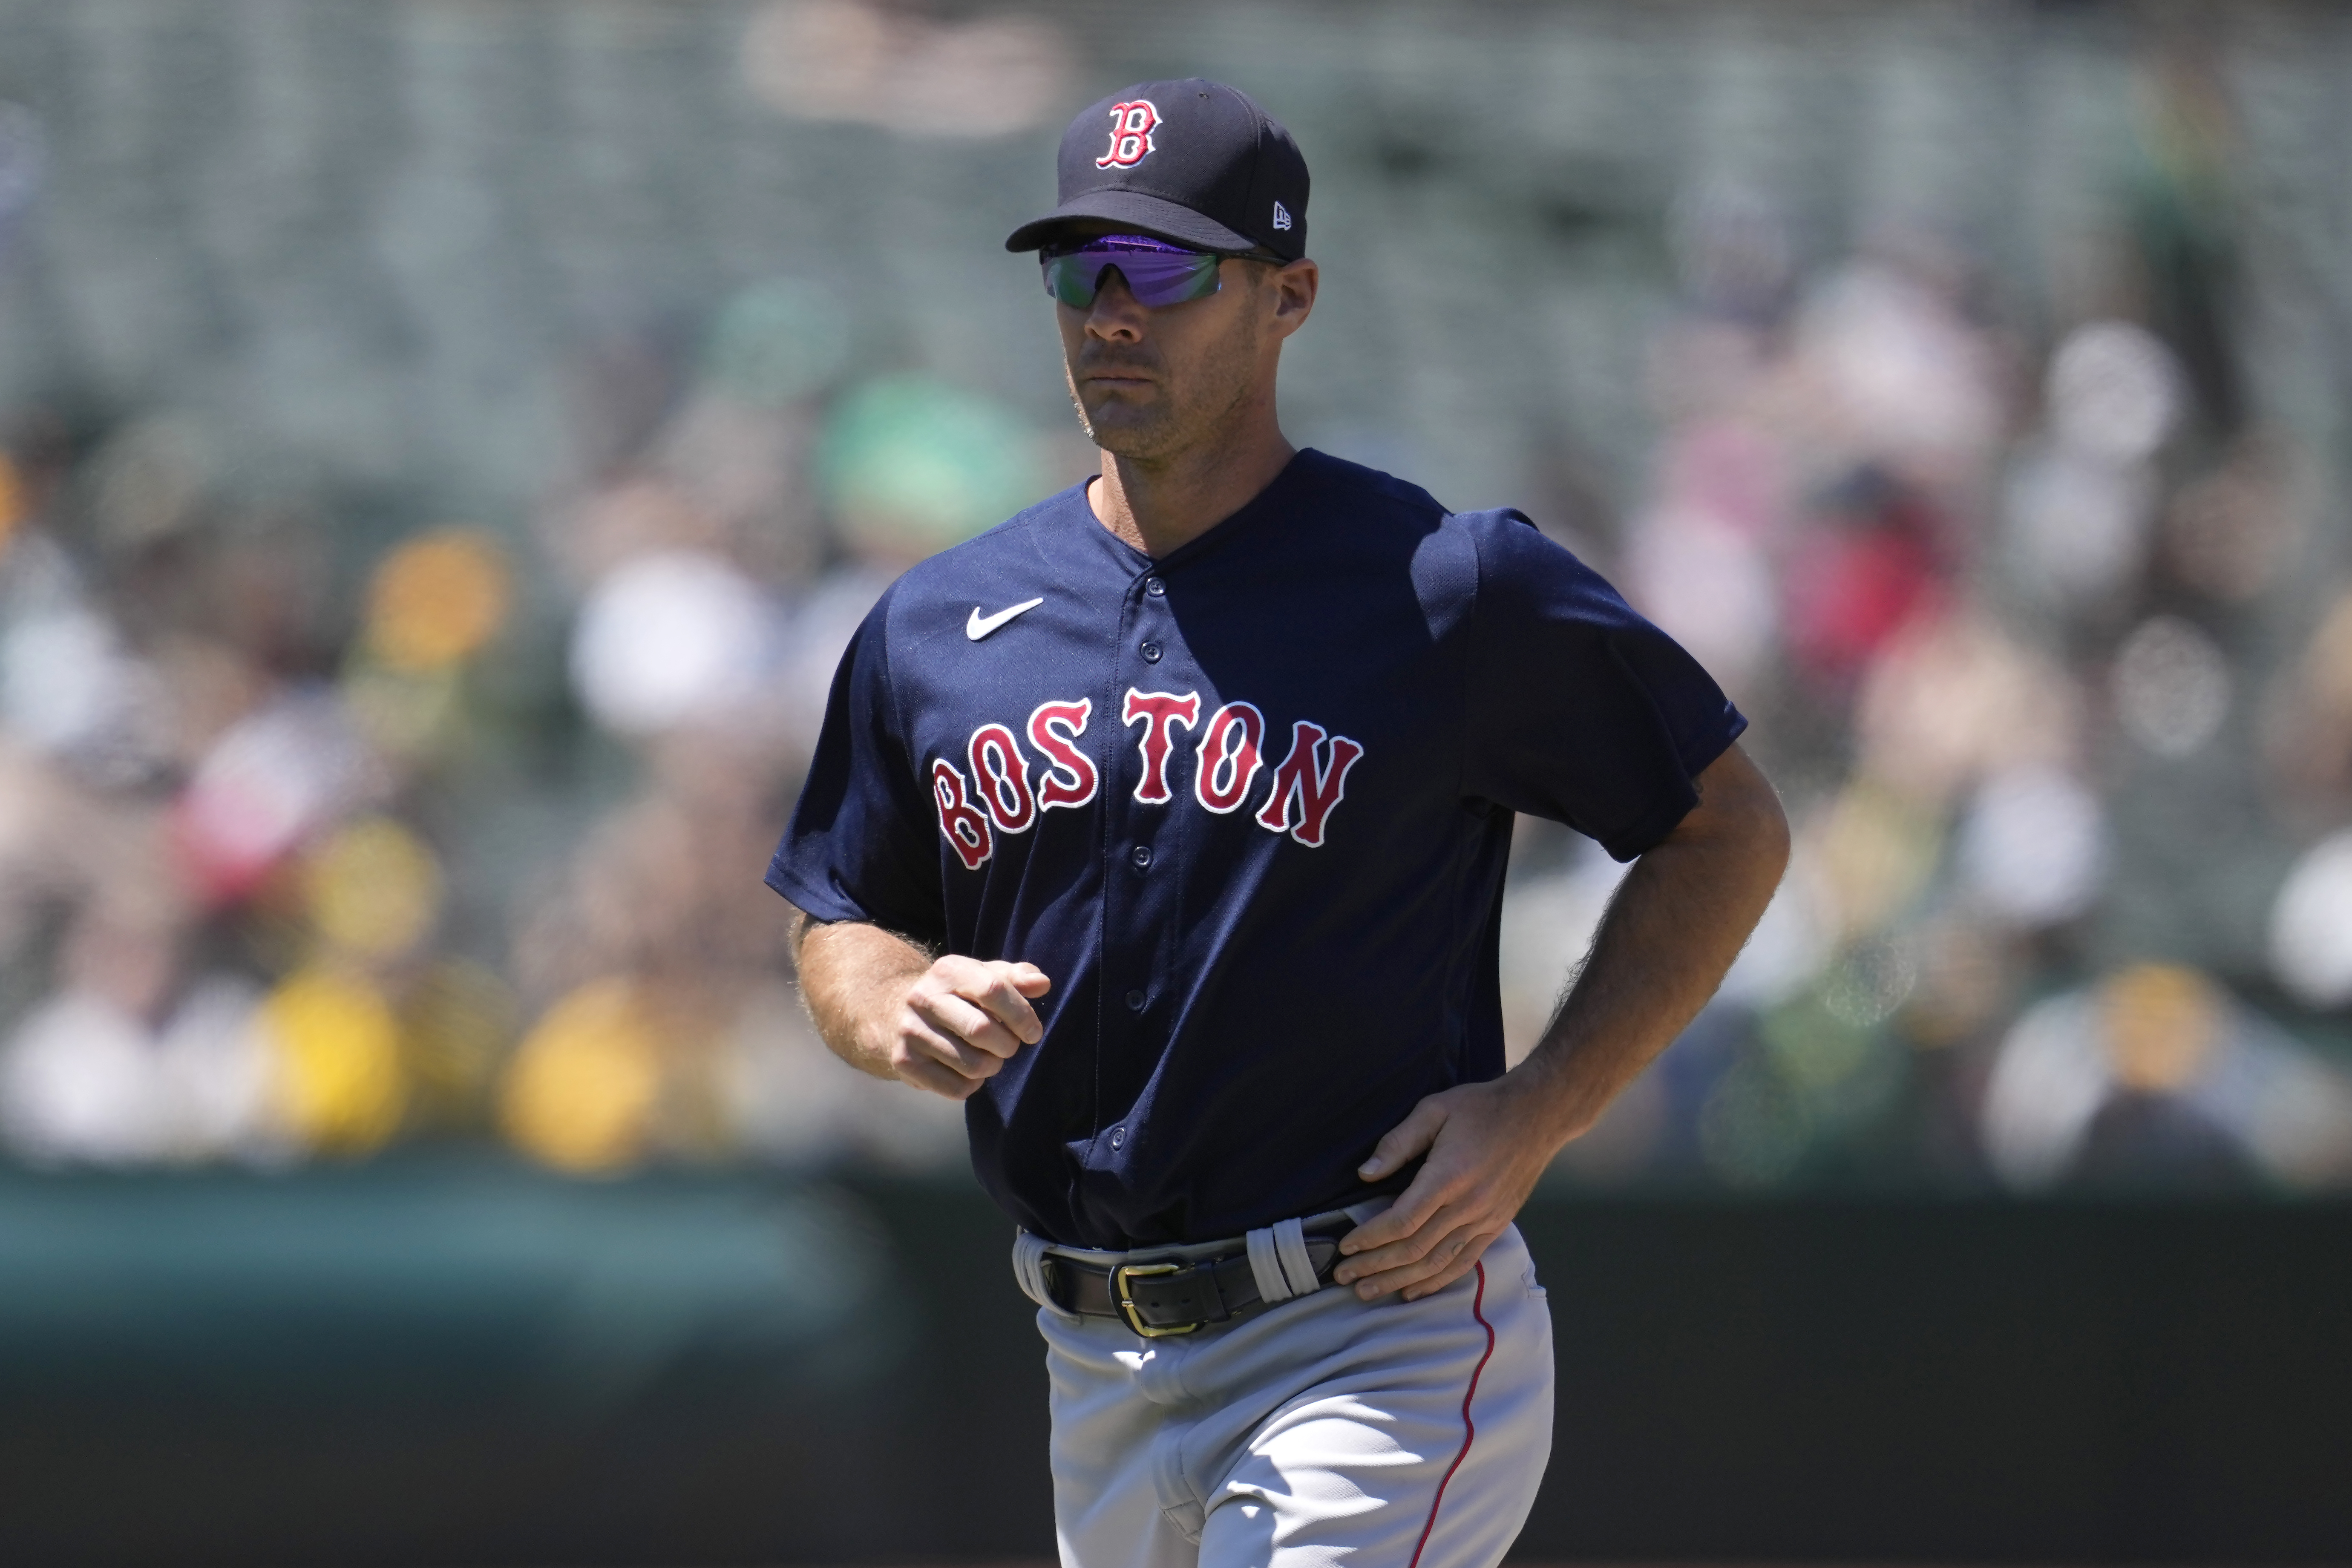 9 thoughts as the Red Sox look to improve on 2020